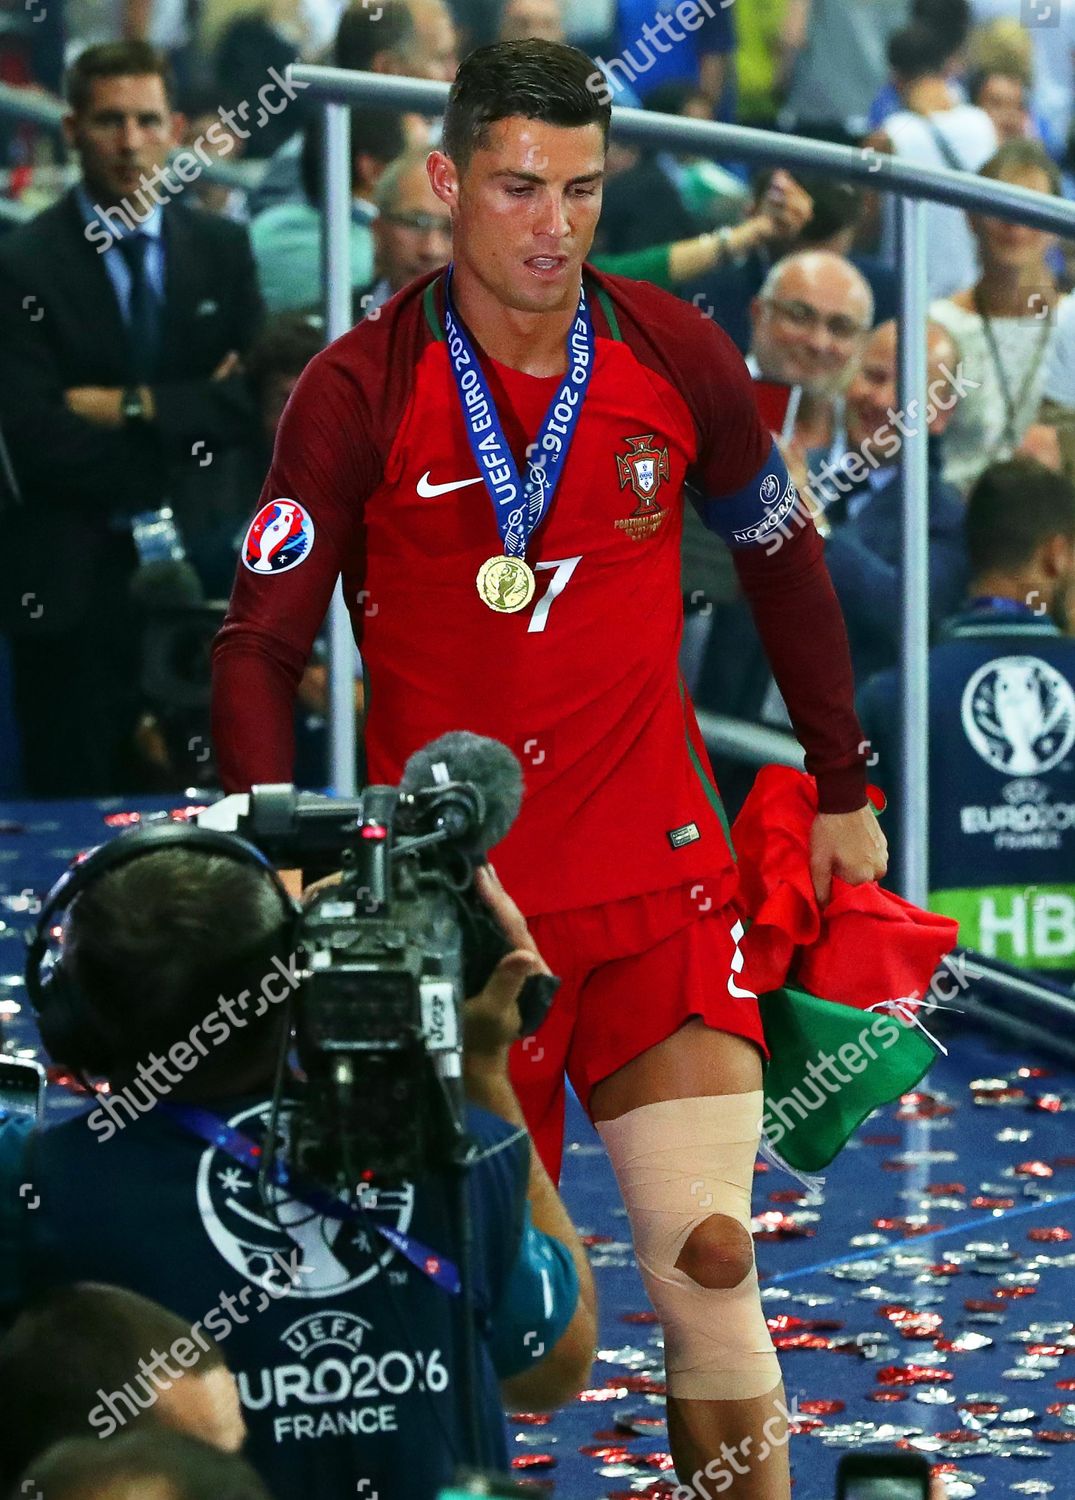 L-R) Cristiano Ronaldo of Portugal with the Nations League trophy